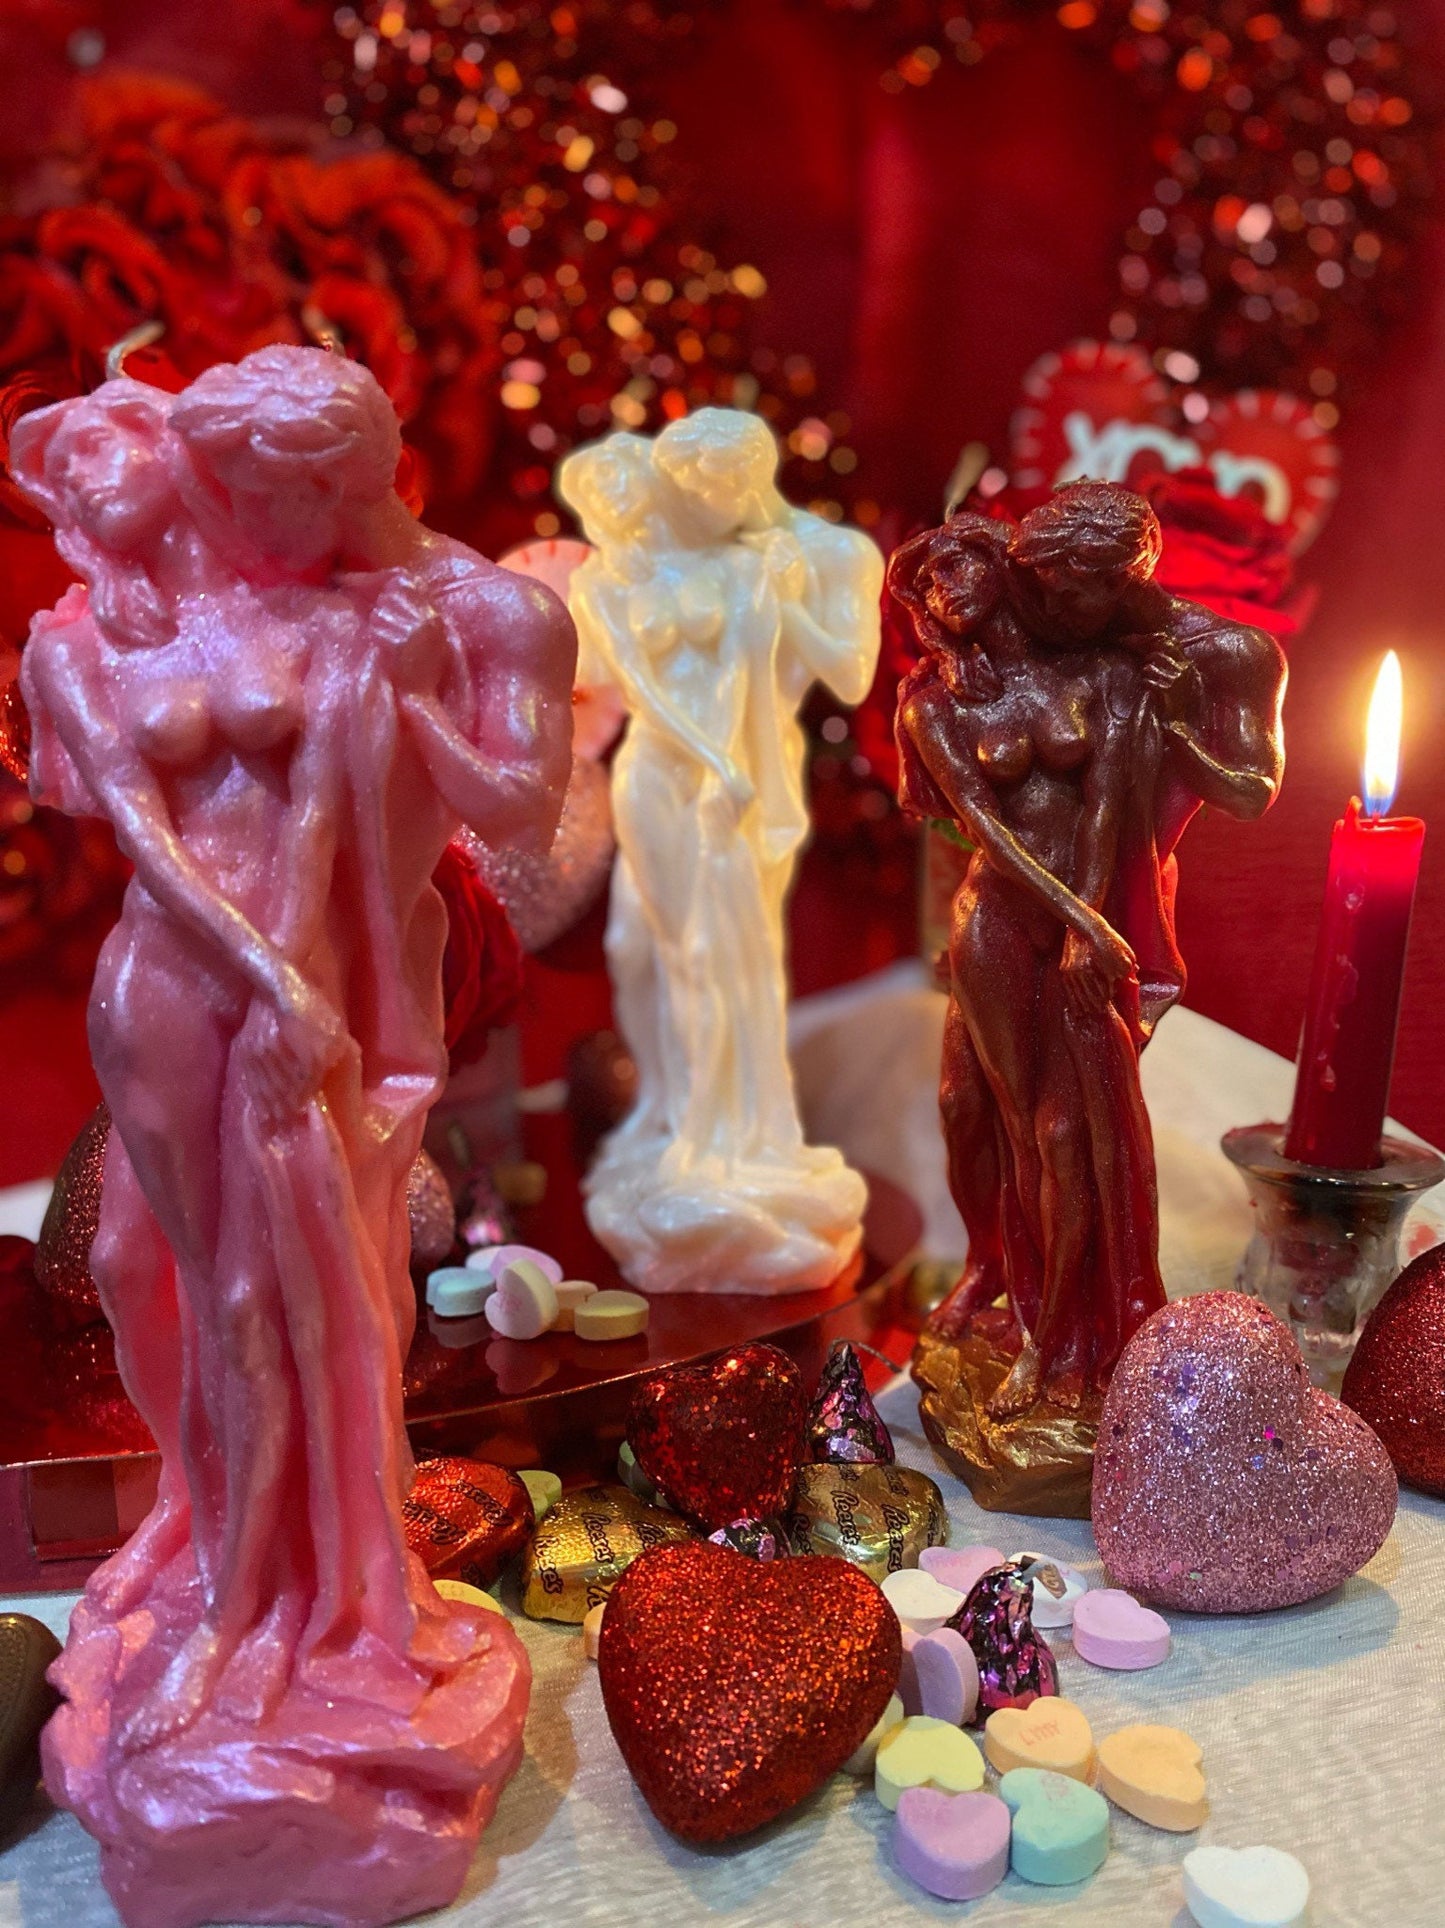 Male & Female Lovers Candle + Adam and Eve + Passion + Binding + Marriage + Friendship + Valentine’s Day